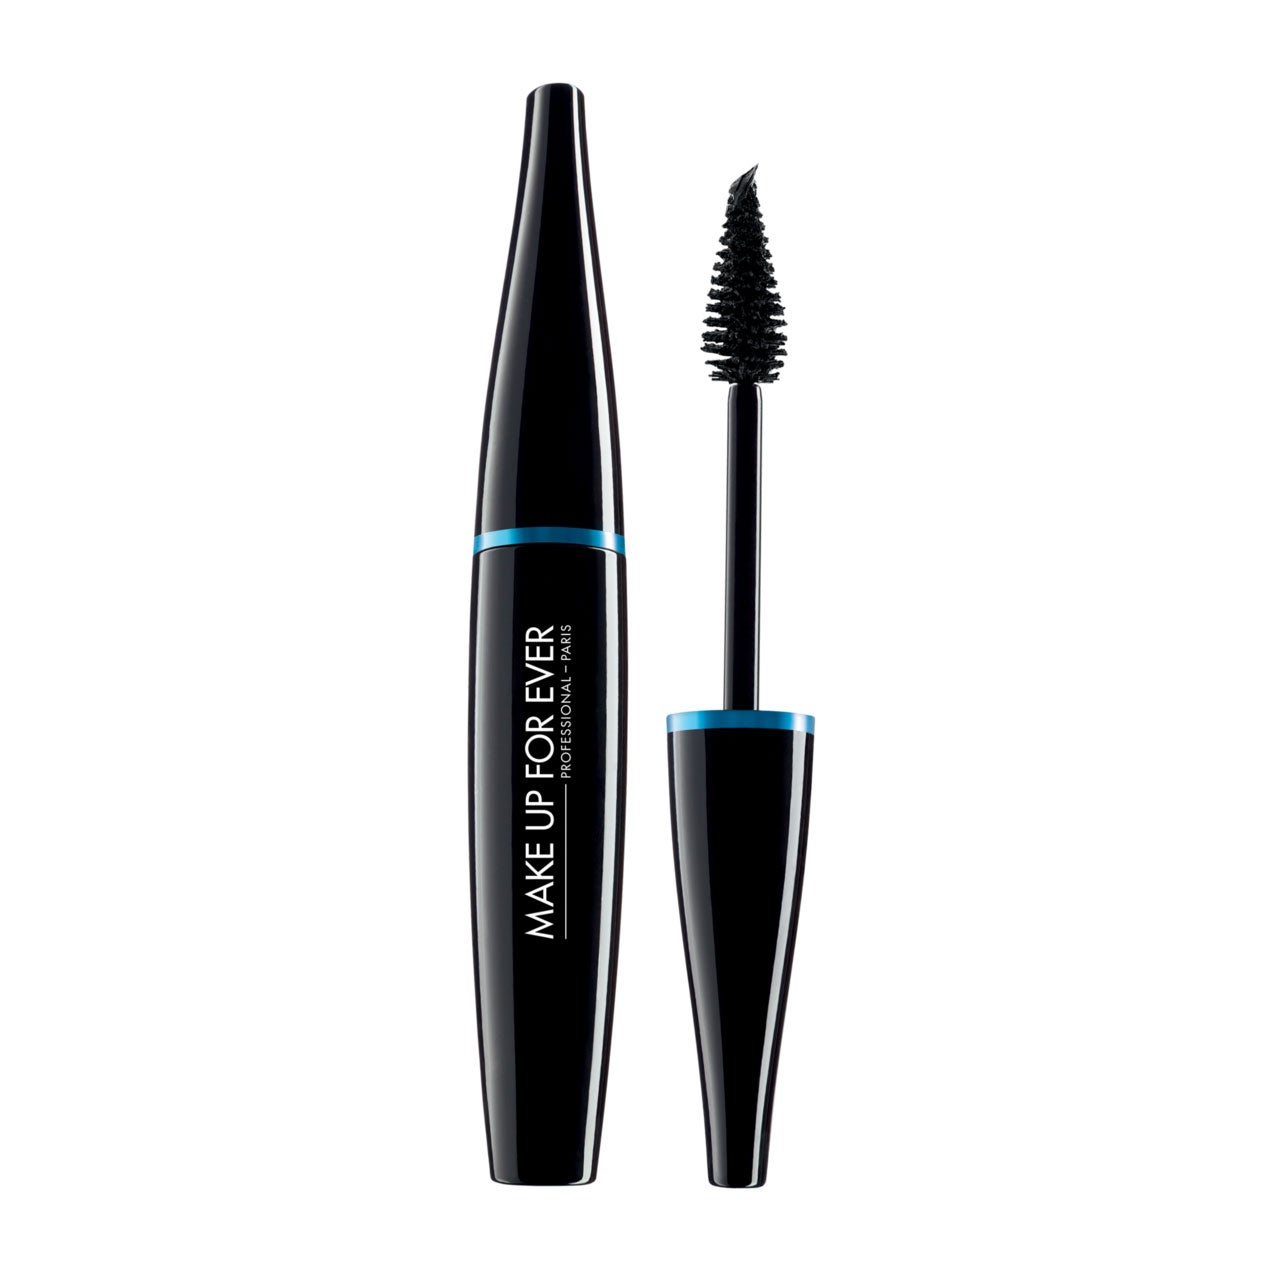 11 Waterproof Mascaras You Need For The End Of Summer
